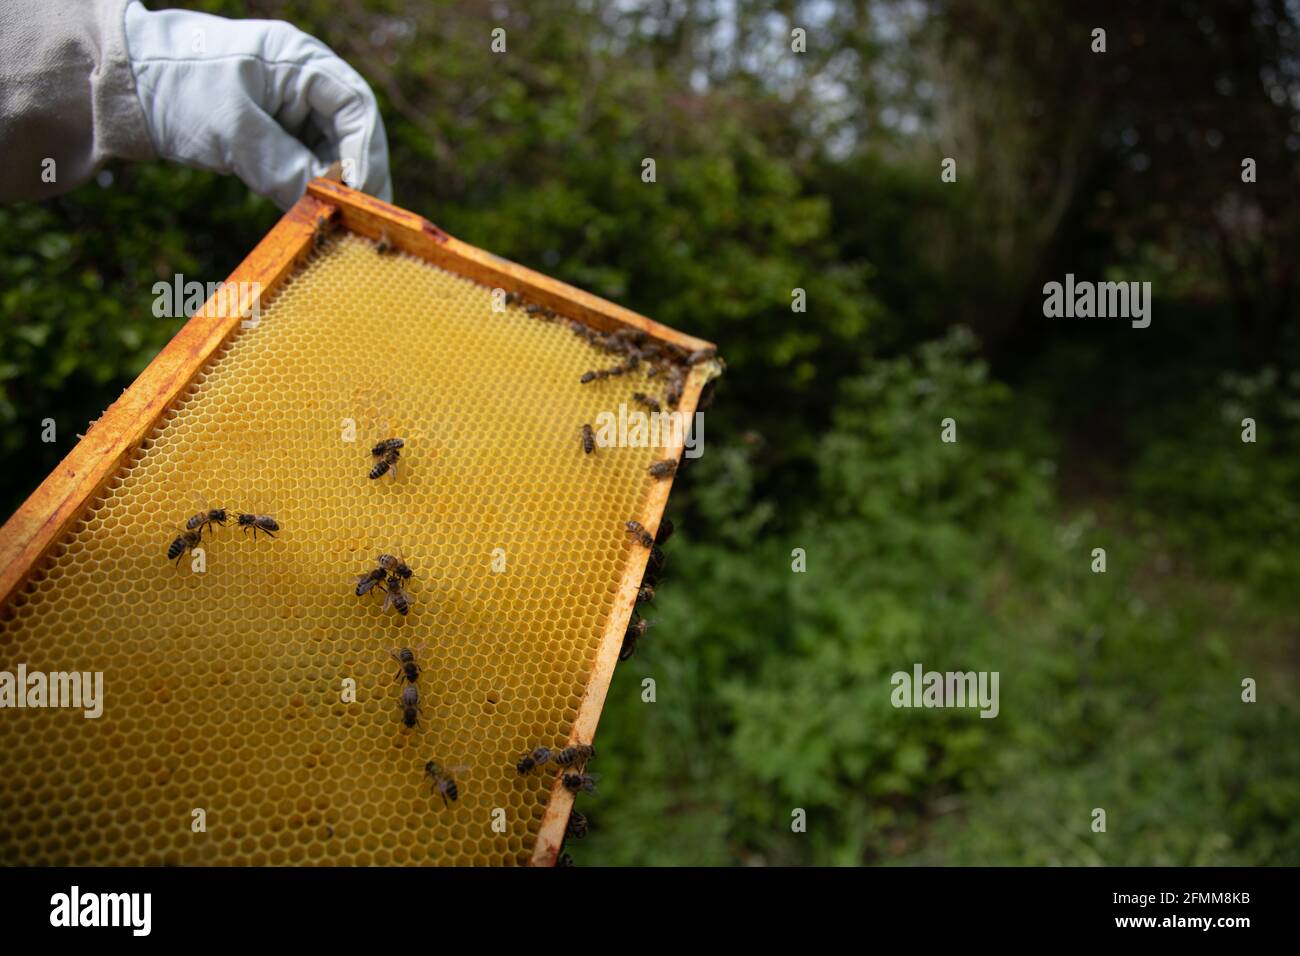 Brood frame with new drawn comb and worker bees Stock Photo